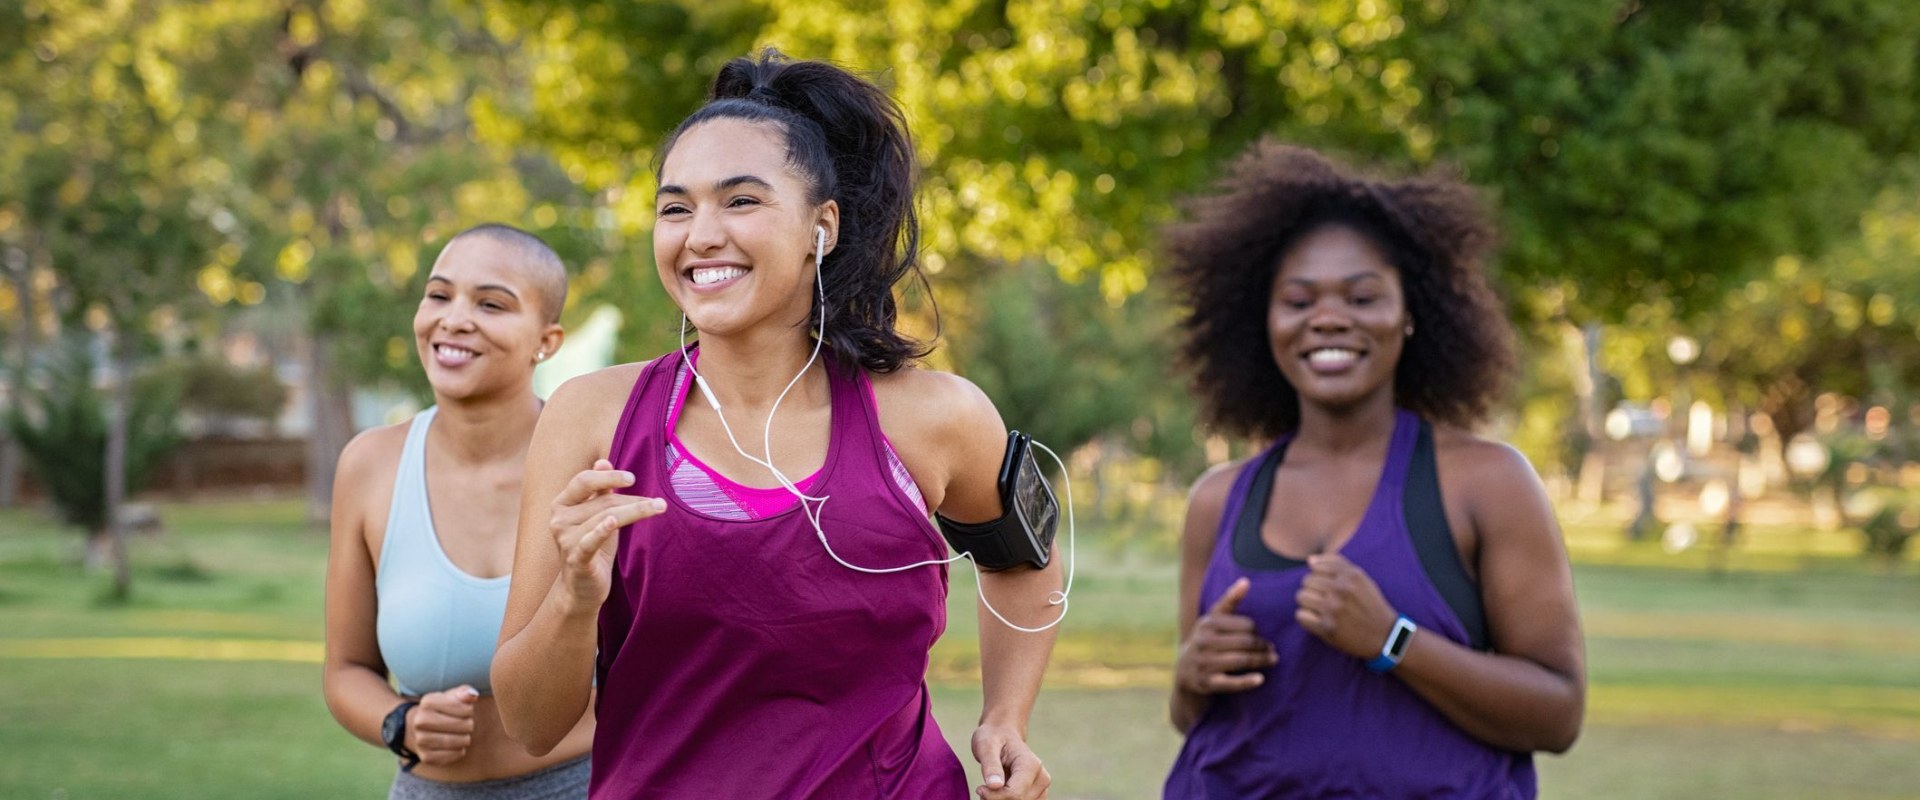 The Benefits of Running and Jogging for Weight Loss